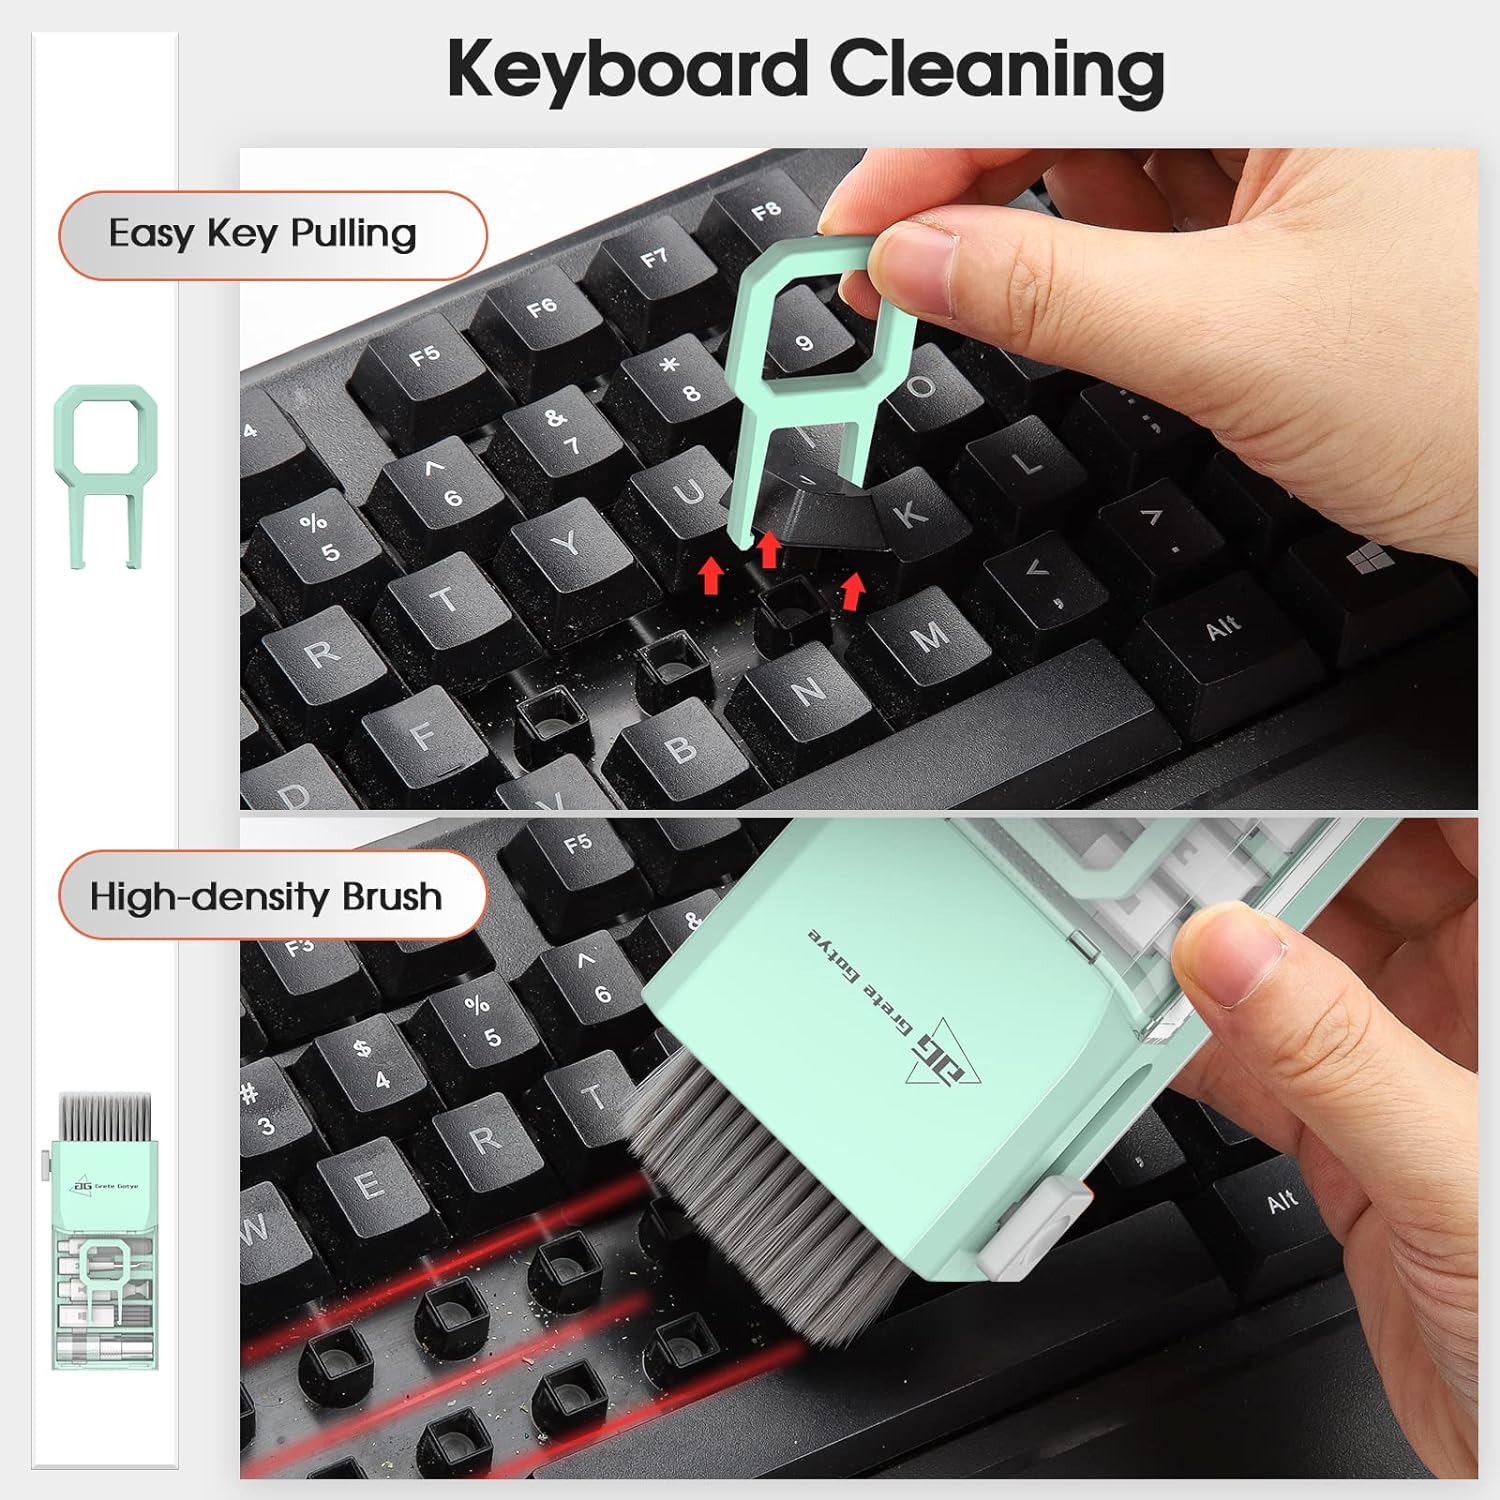 10-in-1 Keyboard Cleaner, Laptop Cleaning Kit Lens Pen for DSLR Cameras, 3 in 1 Earbud Cleaner Pen, Computer Cleaning Kit, Polish Cleaning Cloth Brush for Screen/Electronic/MacBook/Phone/Green